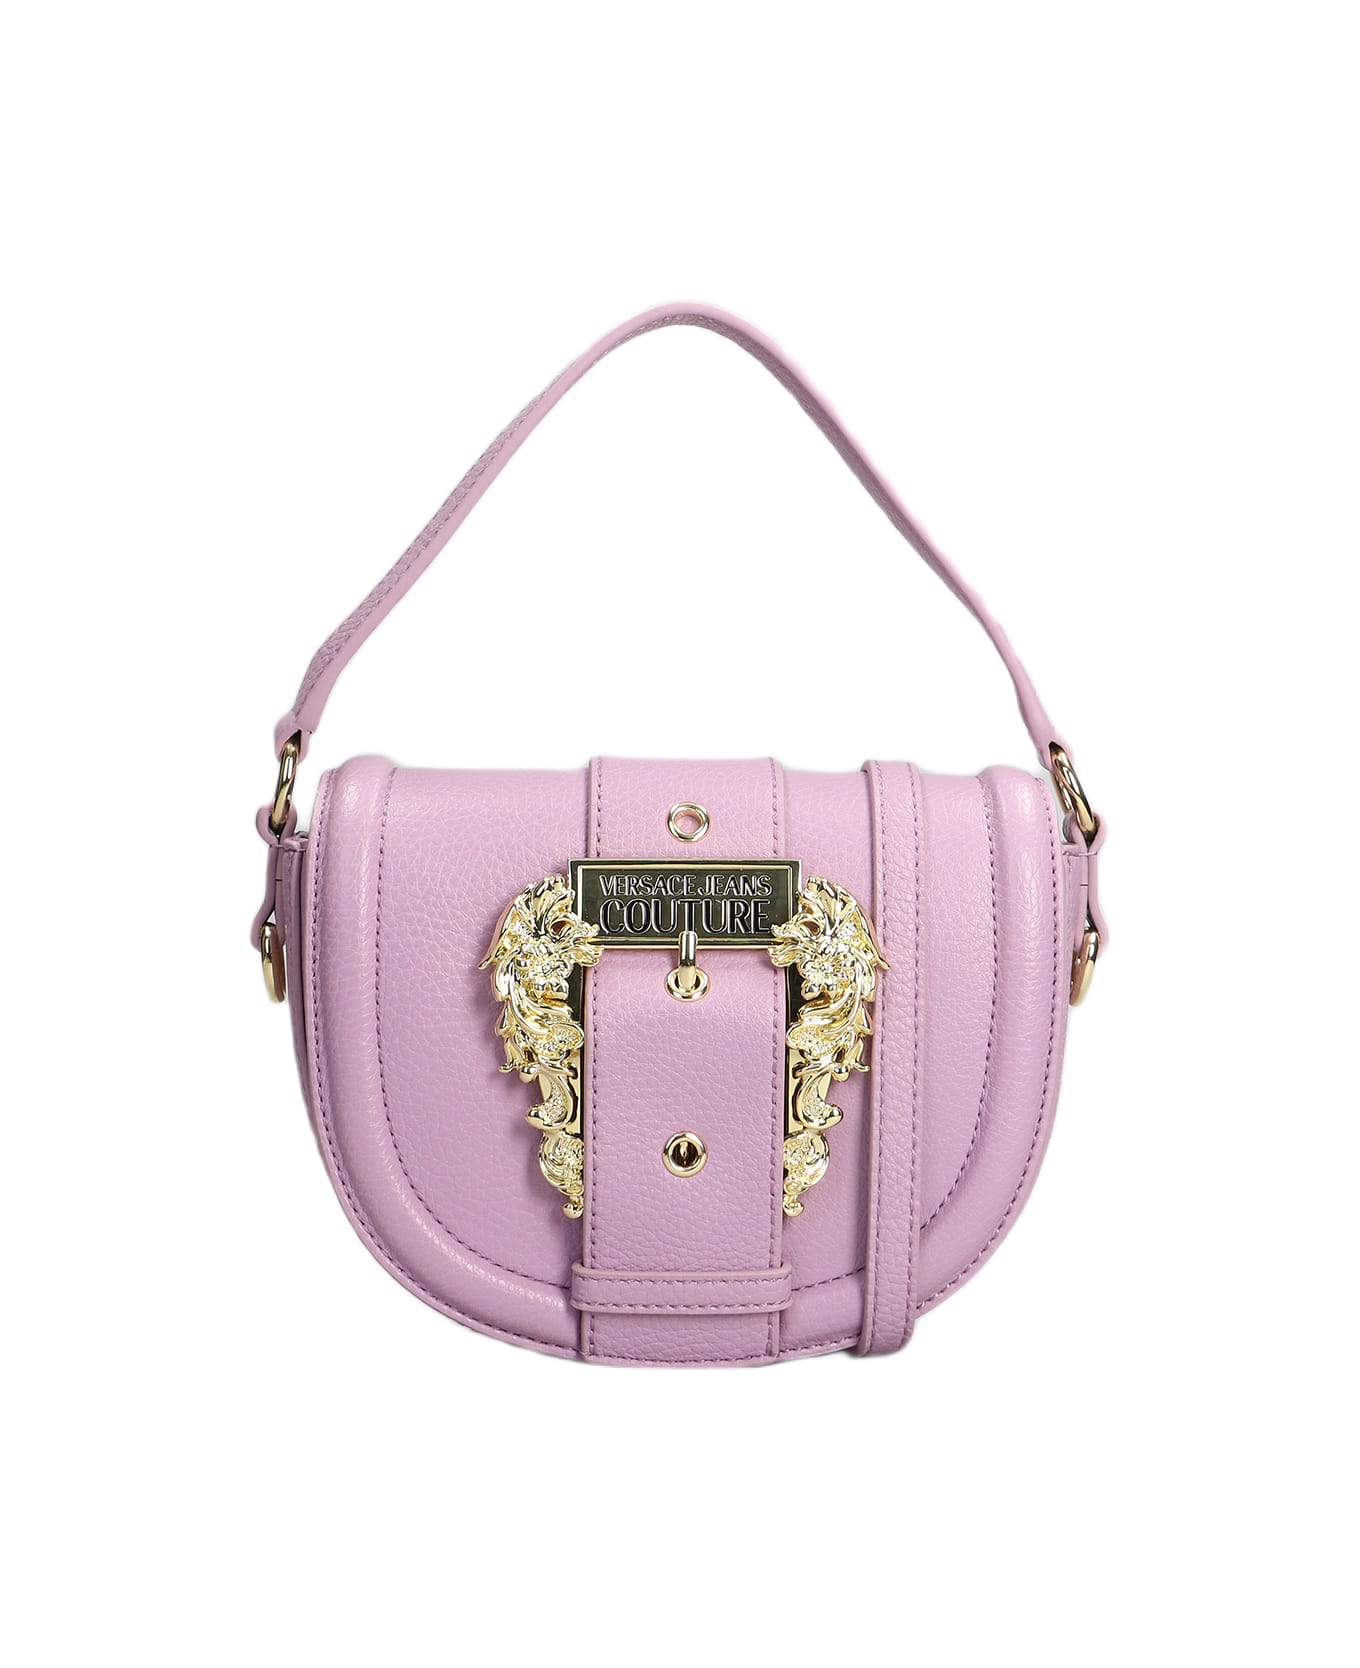 Versace Jeans Couture Bag - Pink & Purple トートバッグ